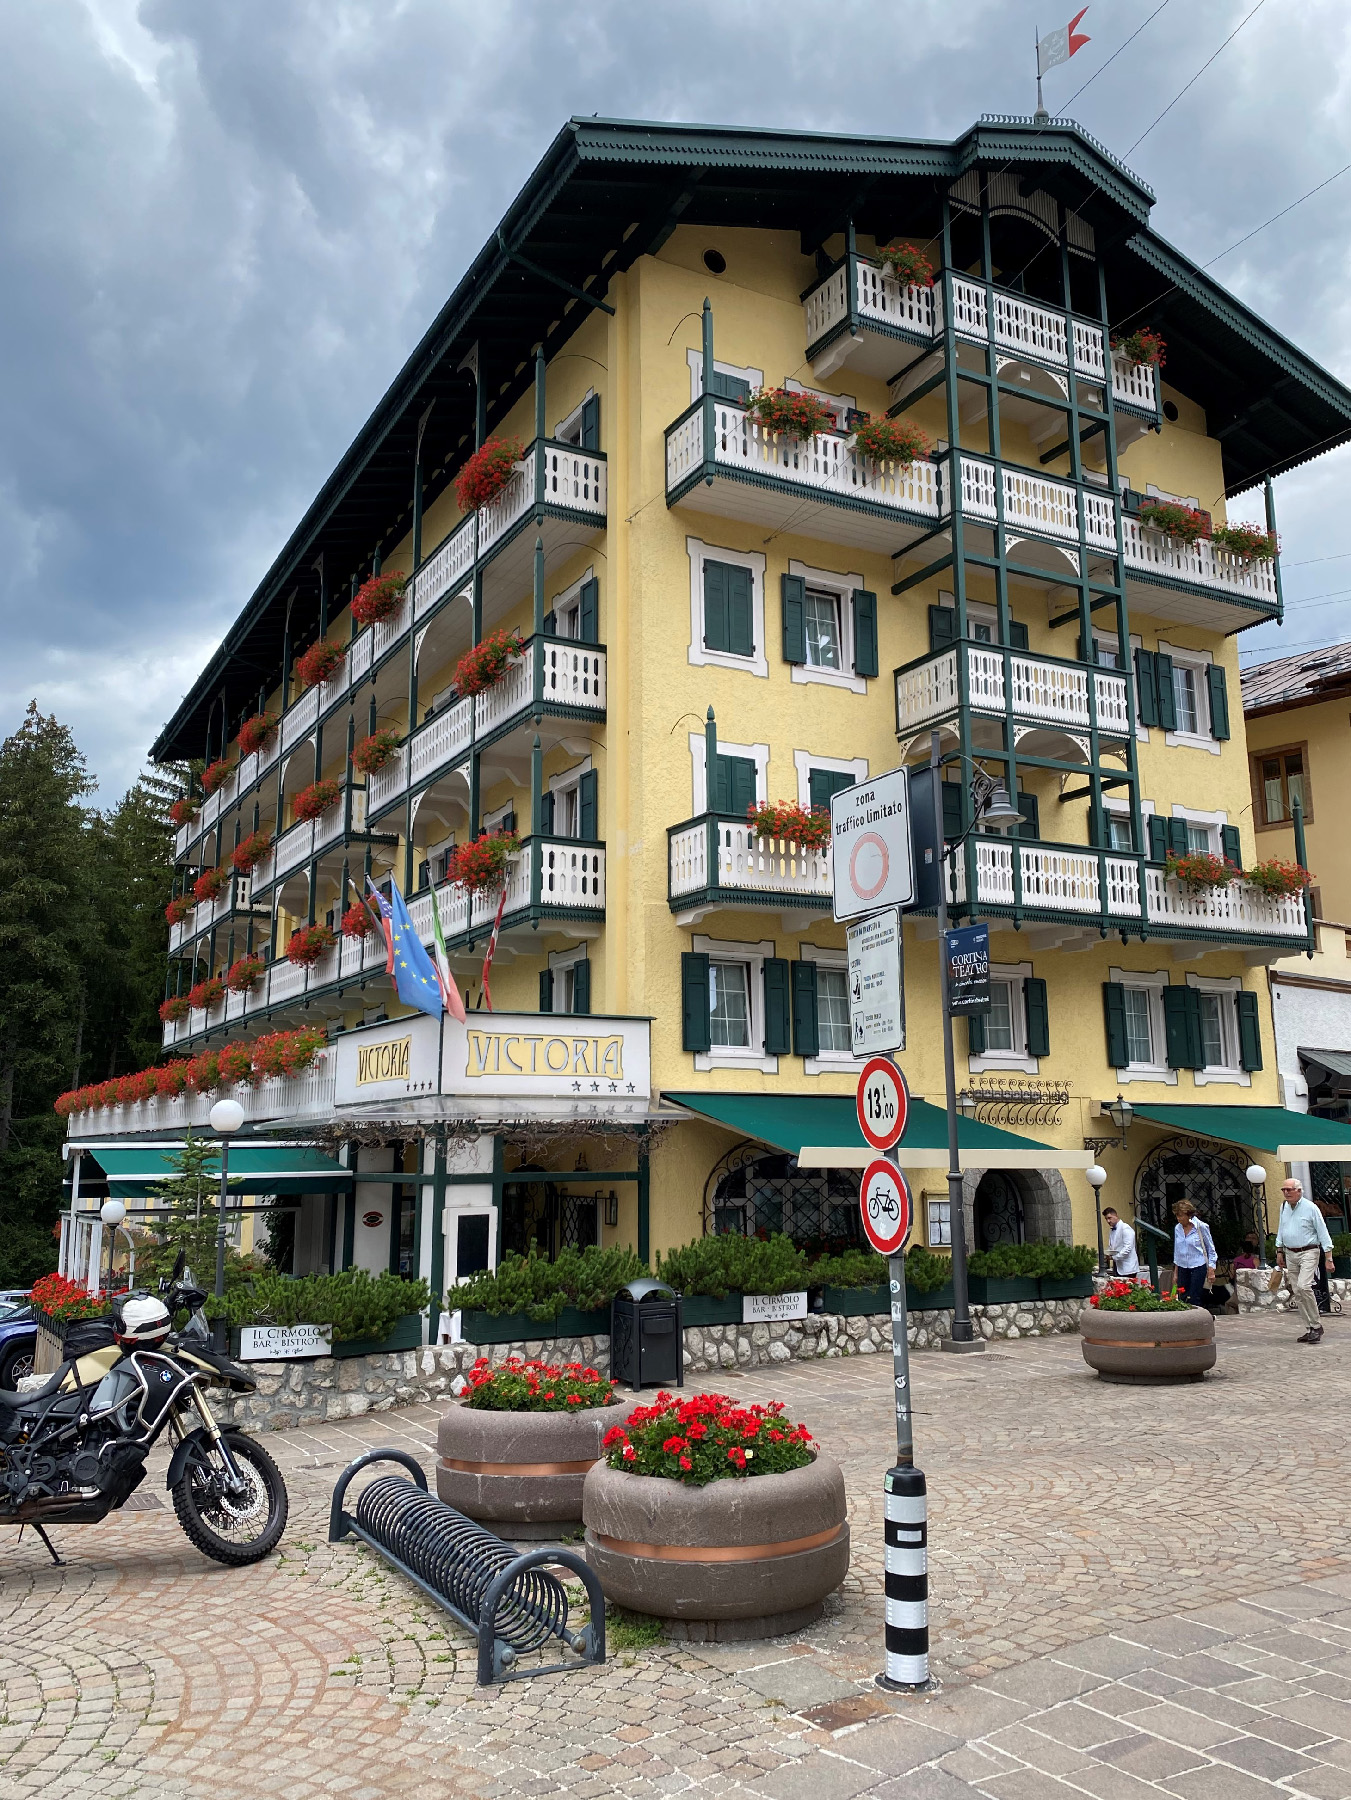 The Park Hotel Victoria in Cortina d’Ampezzo, Belluno, Italy, displays the characteristic charm of European villages.